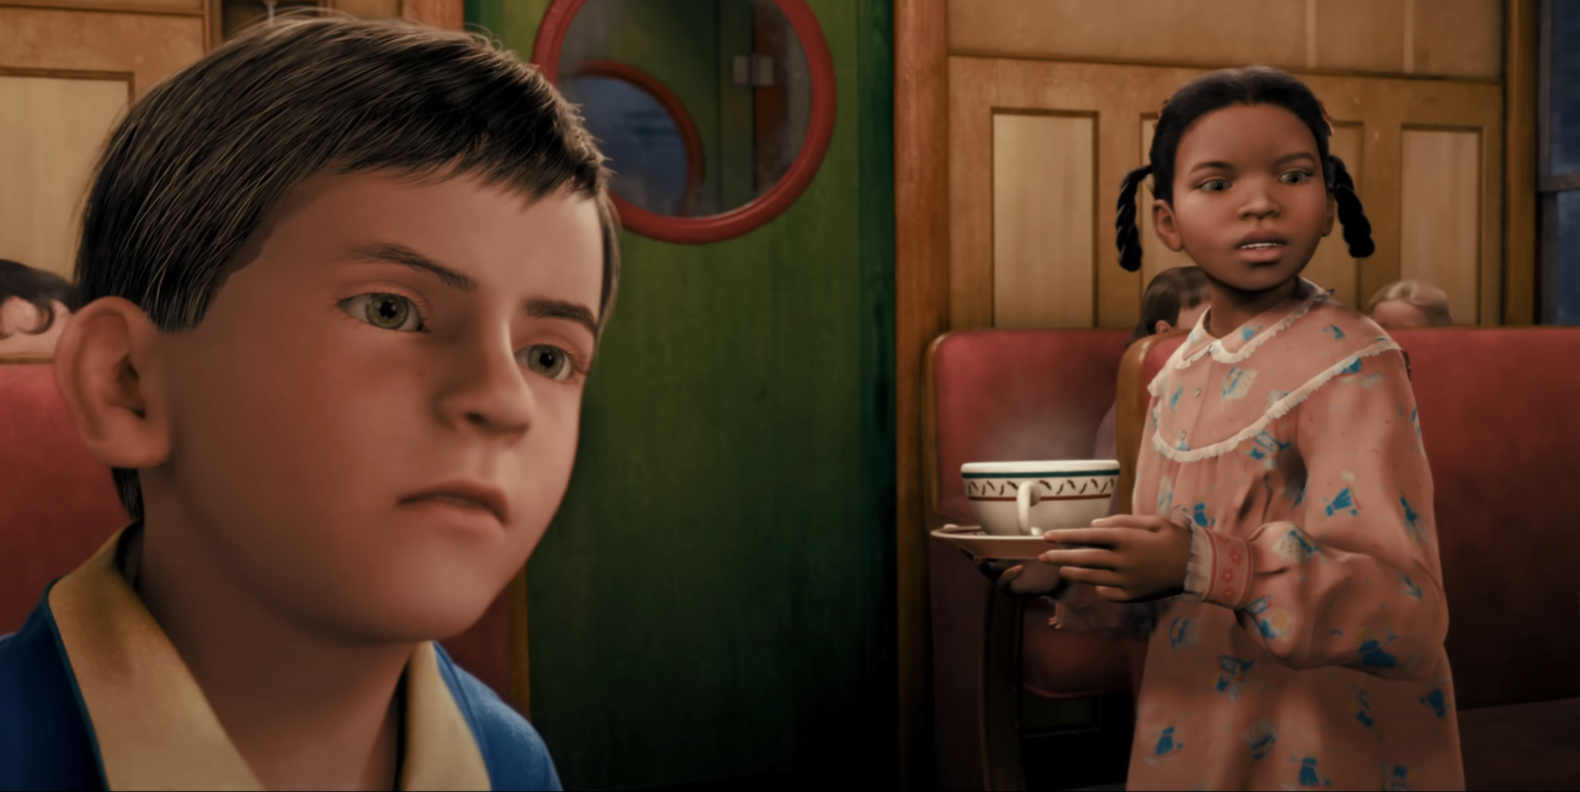 Two animated characters, a boy and a girl, inside a train cabin with a cupcake